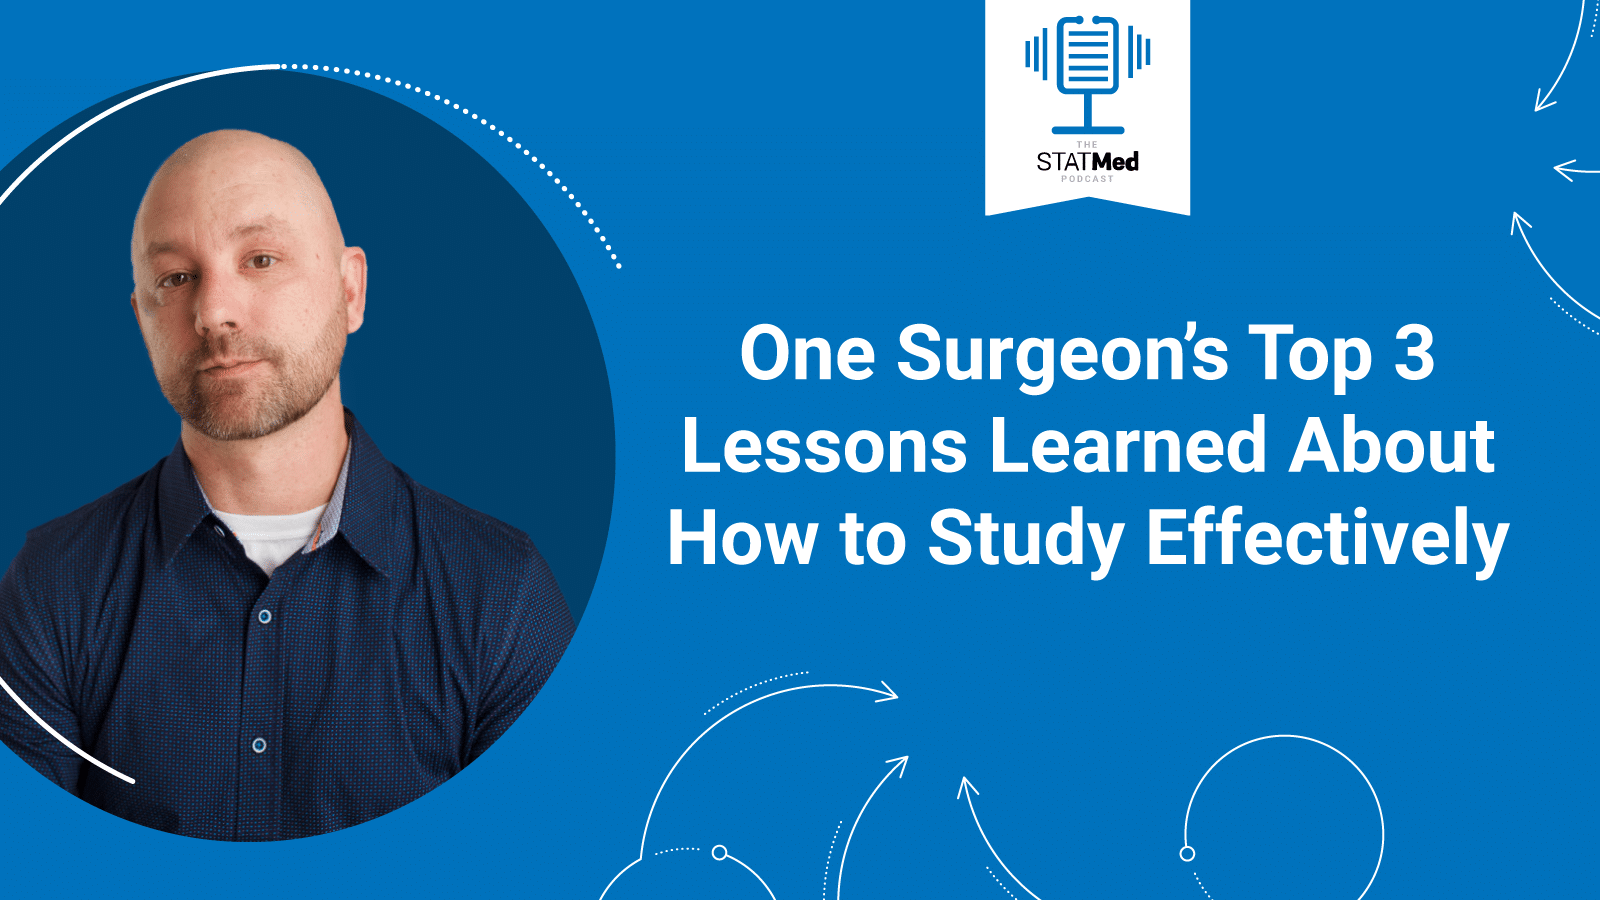 One Surgeon’s Top 3 Lessons Learned About How to Study Effectively